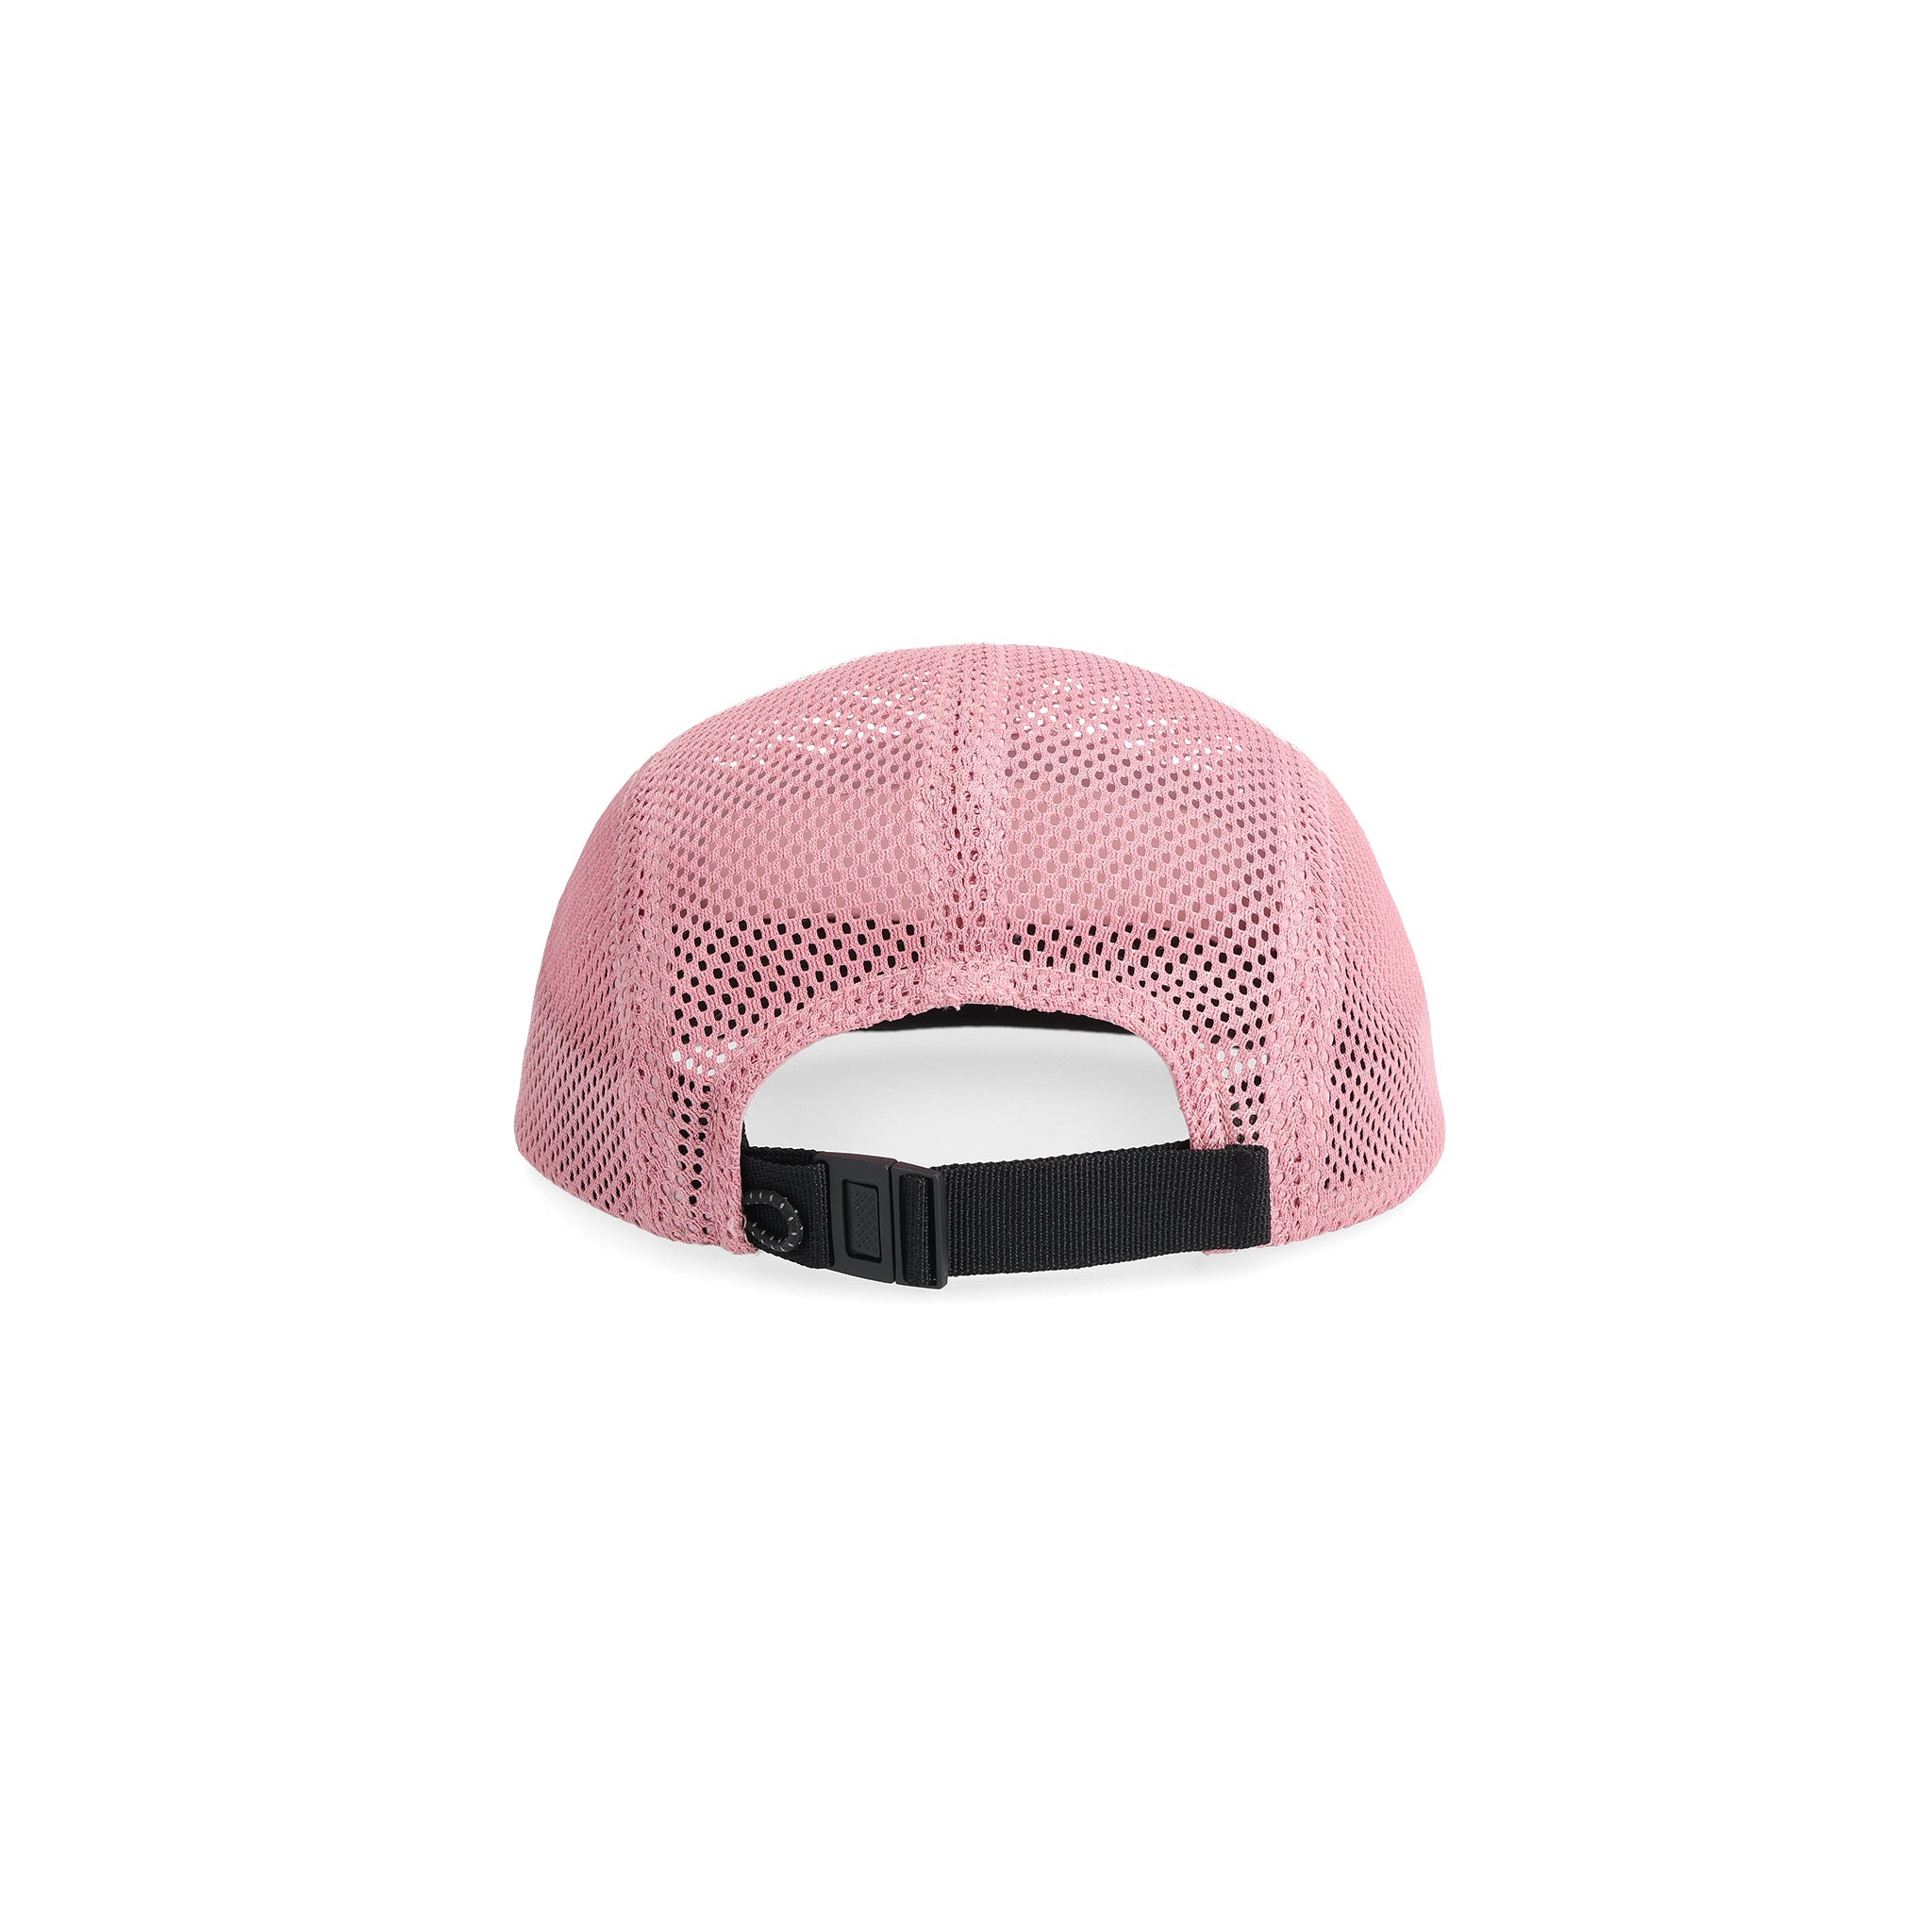 Back View of Topo Designs Global Hat in "Rose"